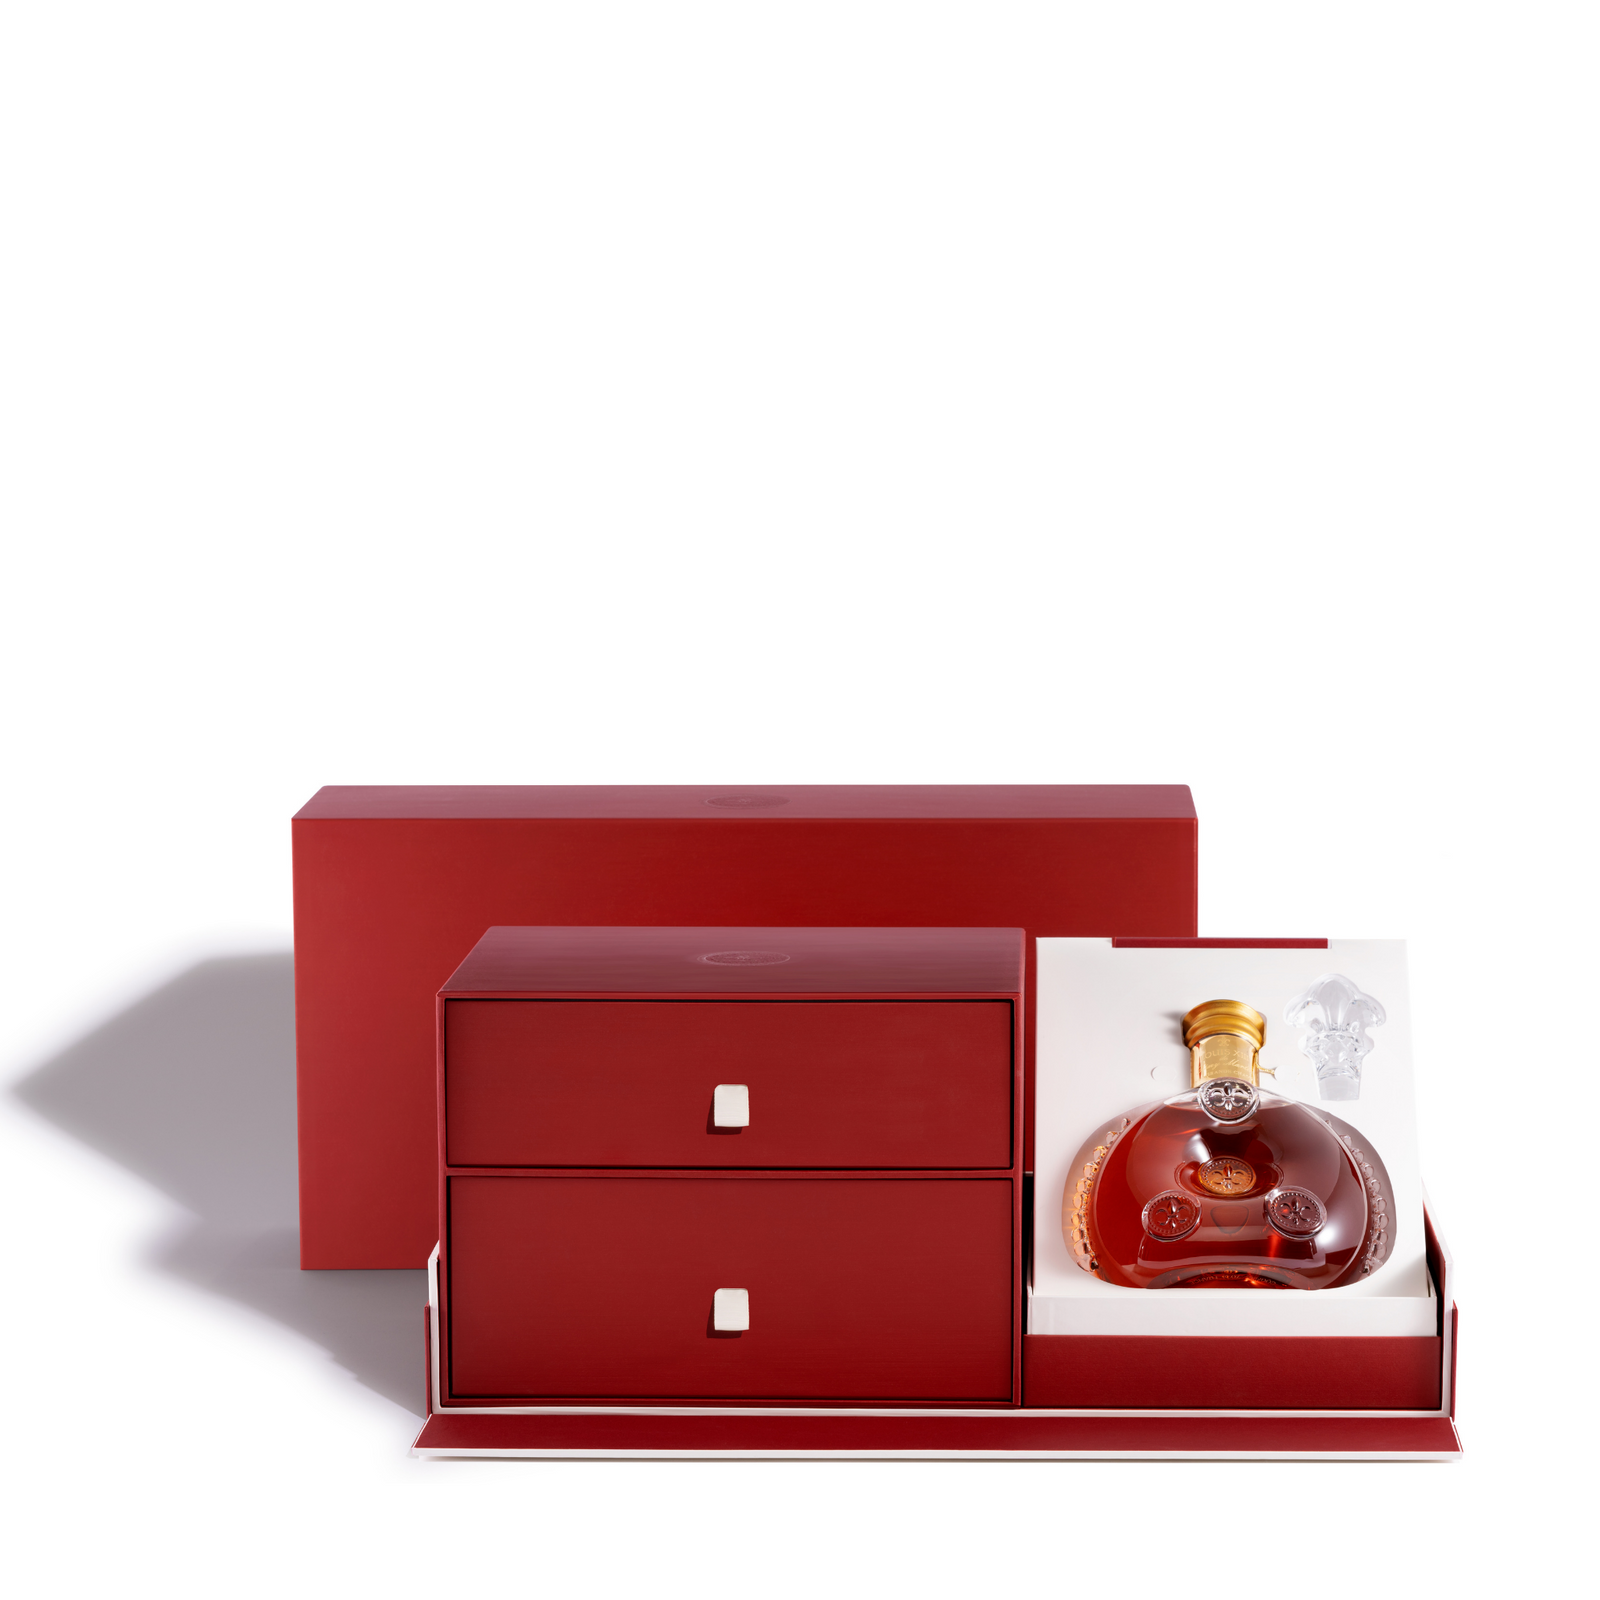 A packshot of the bellota set with the bottle of LOUIS XIII cognac exposed